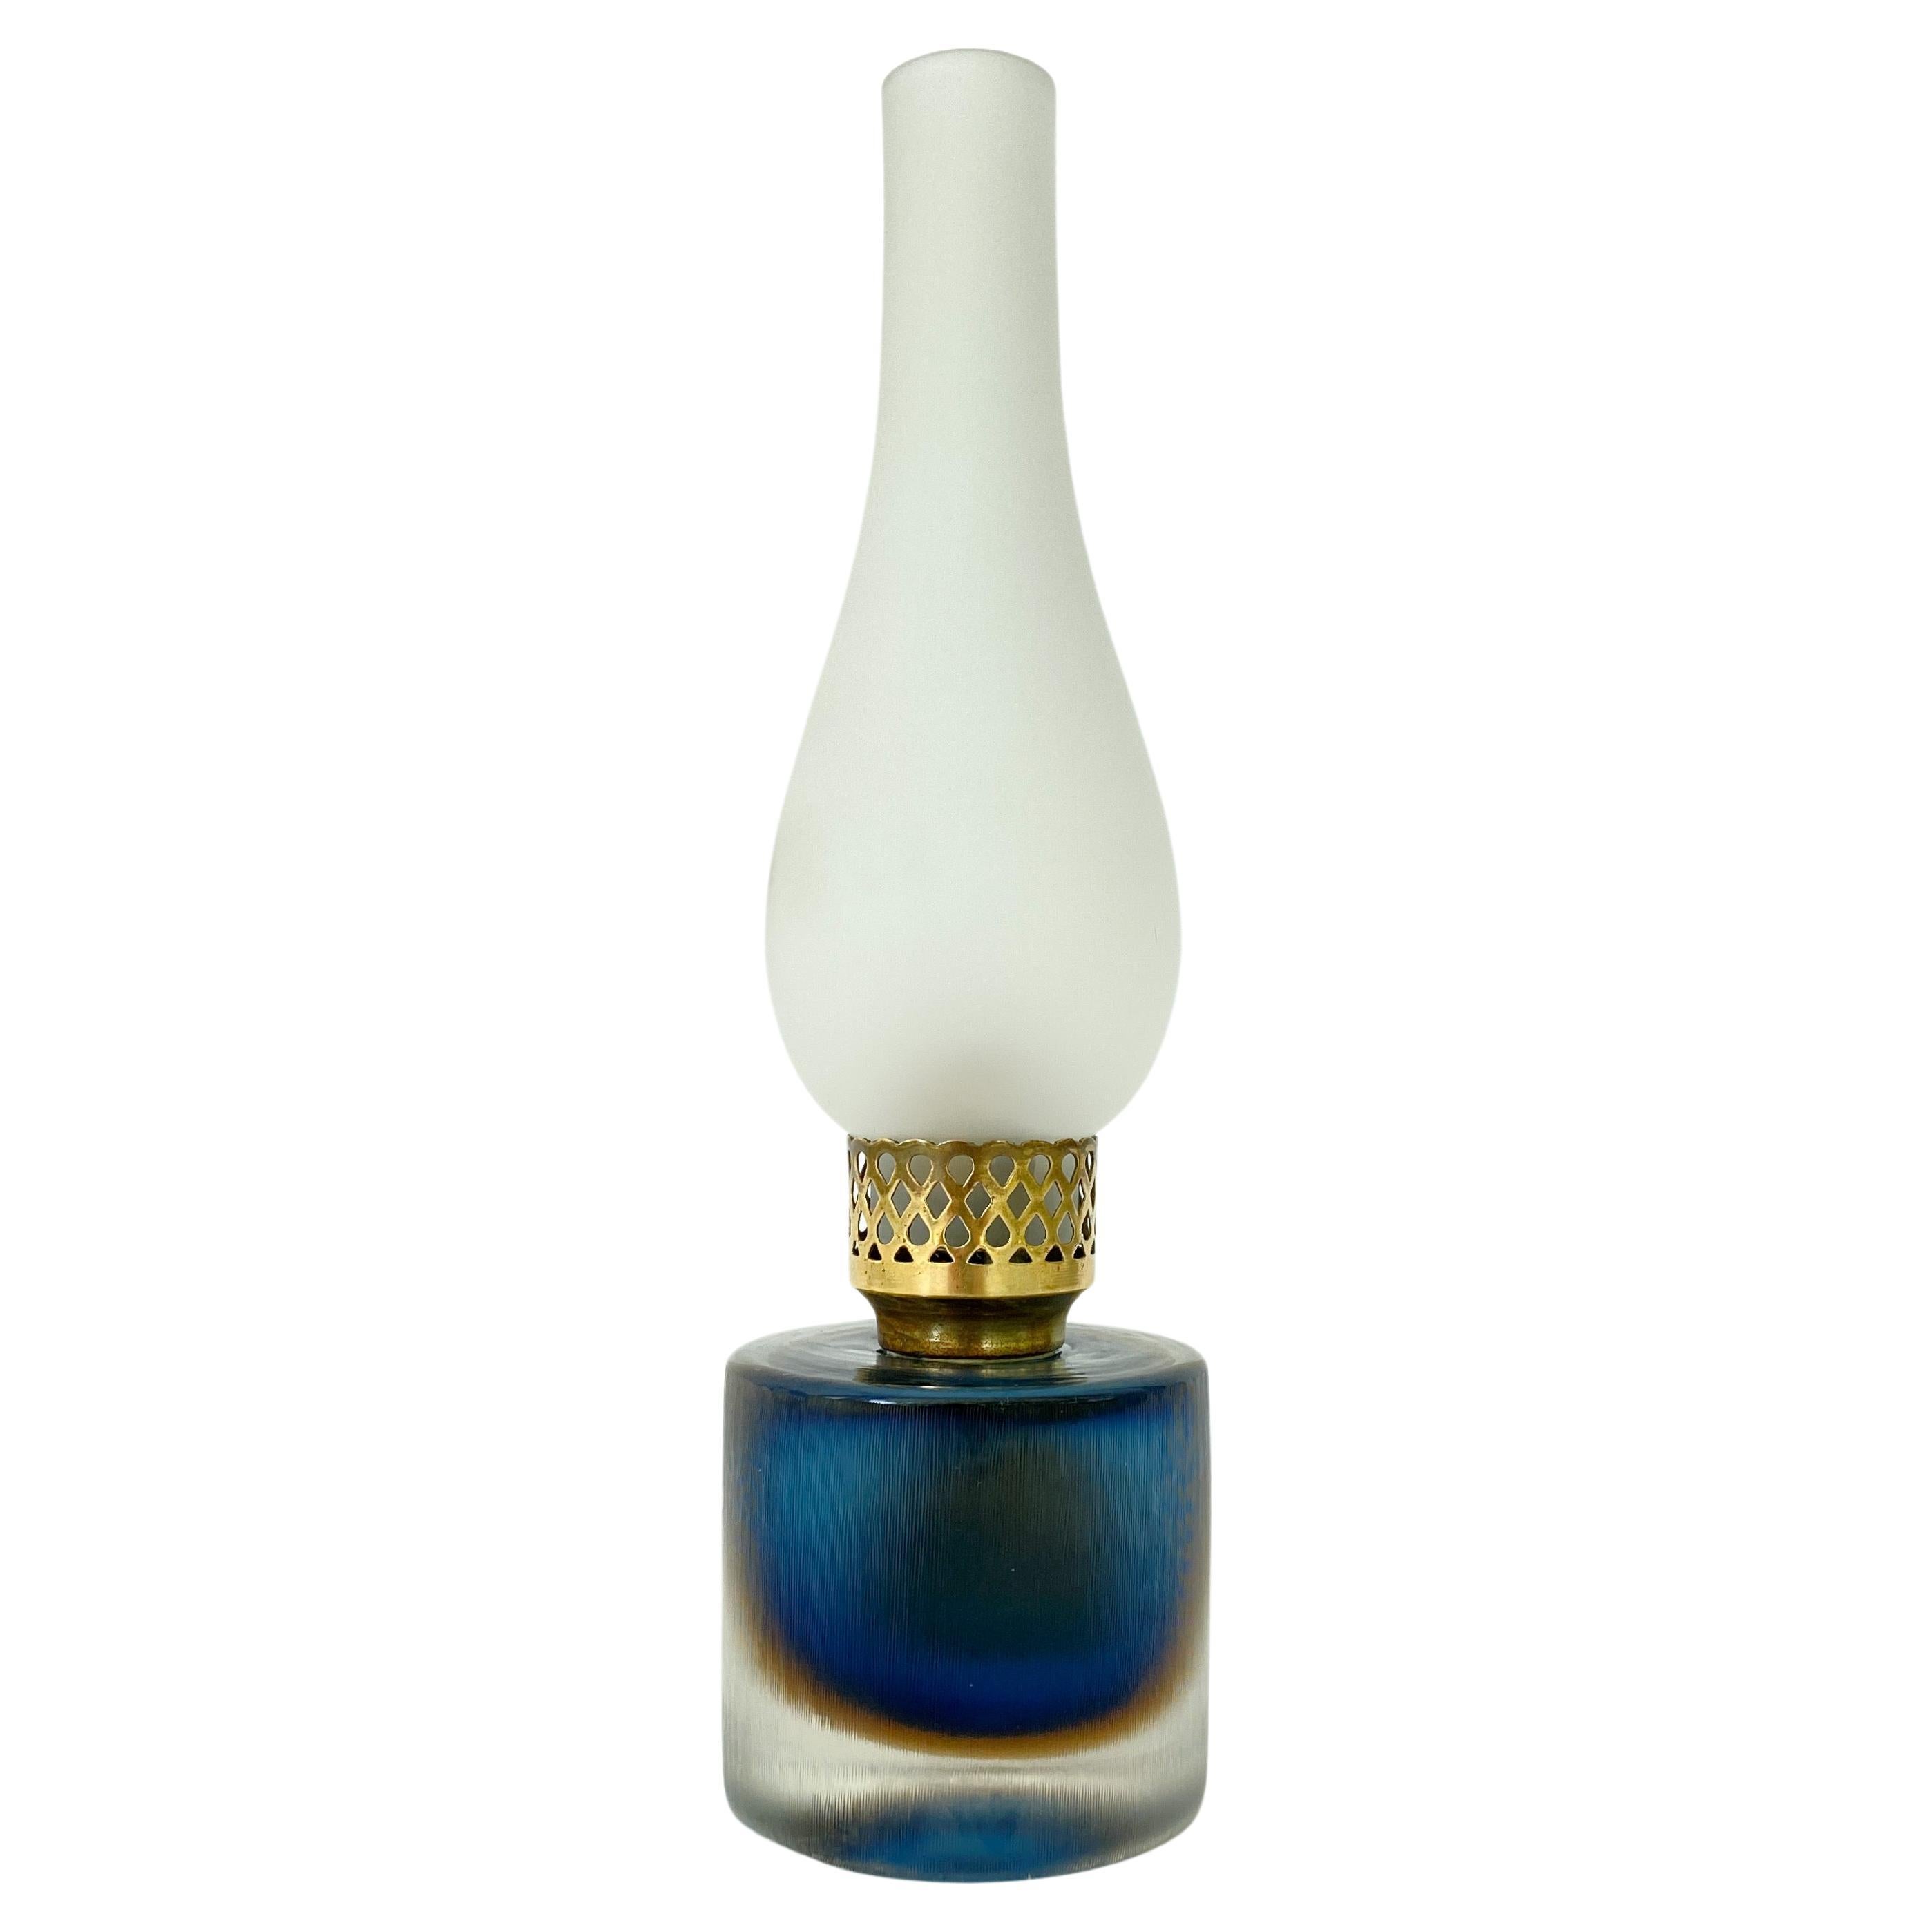 Venini 12" Sommerso Inciso Blue / Amber Lamp, Three Line Acid Etched For Sale